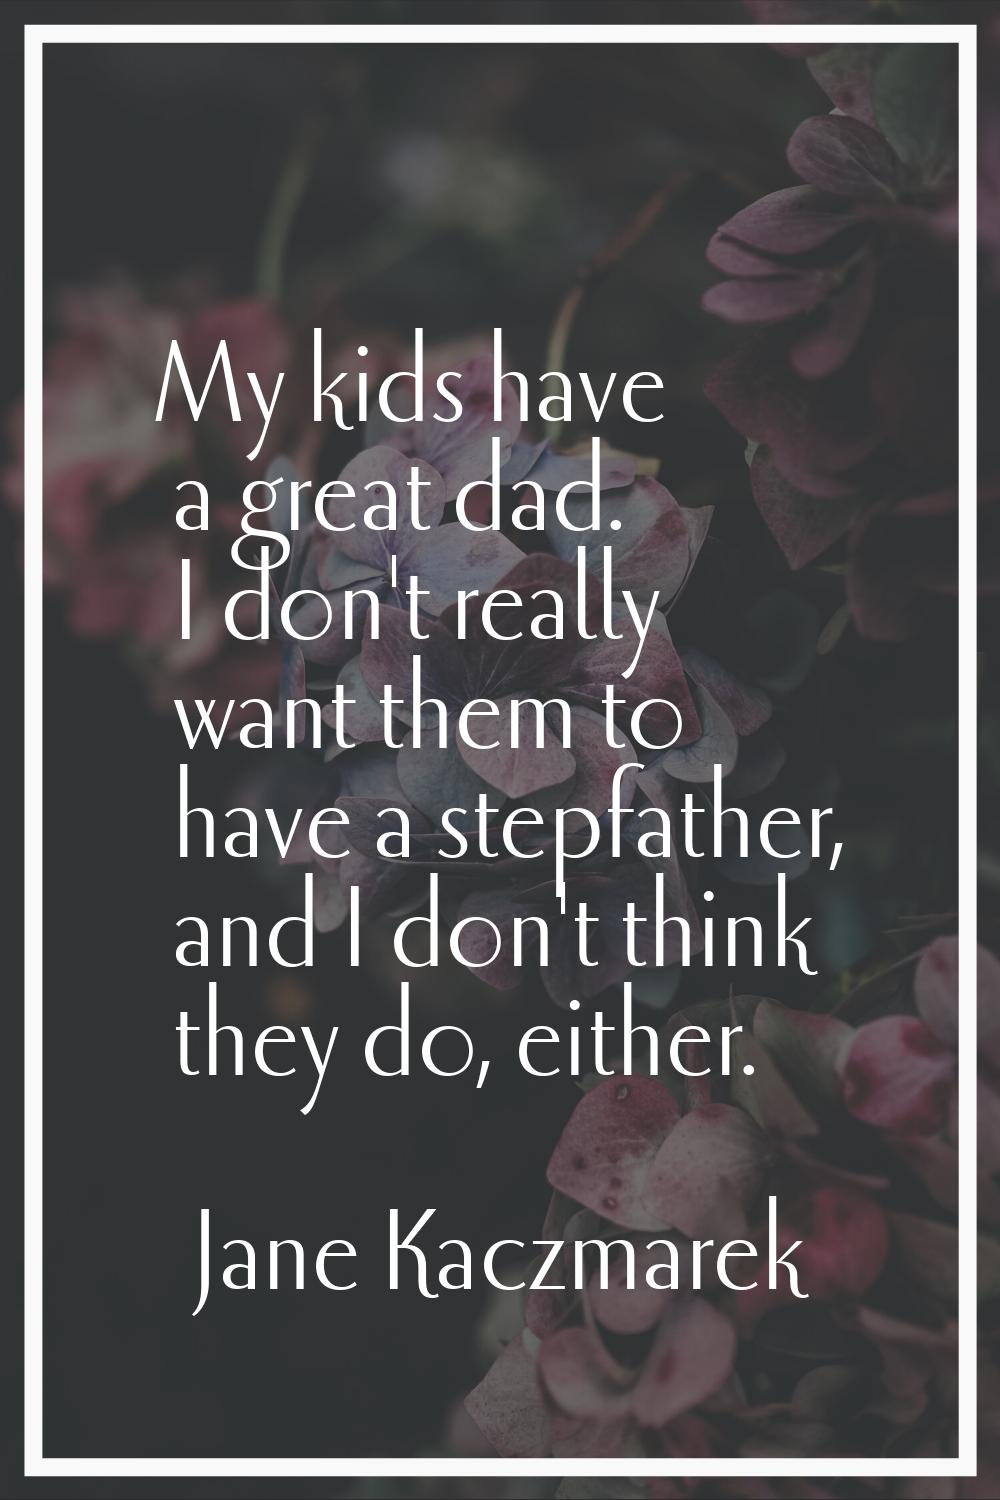 My kids have a great dad. I don't really want them to have a stepfather, and I don't think they do,